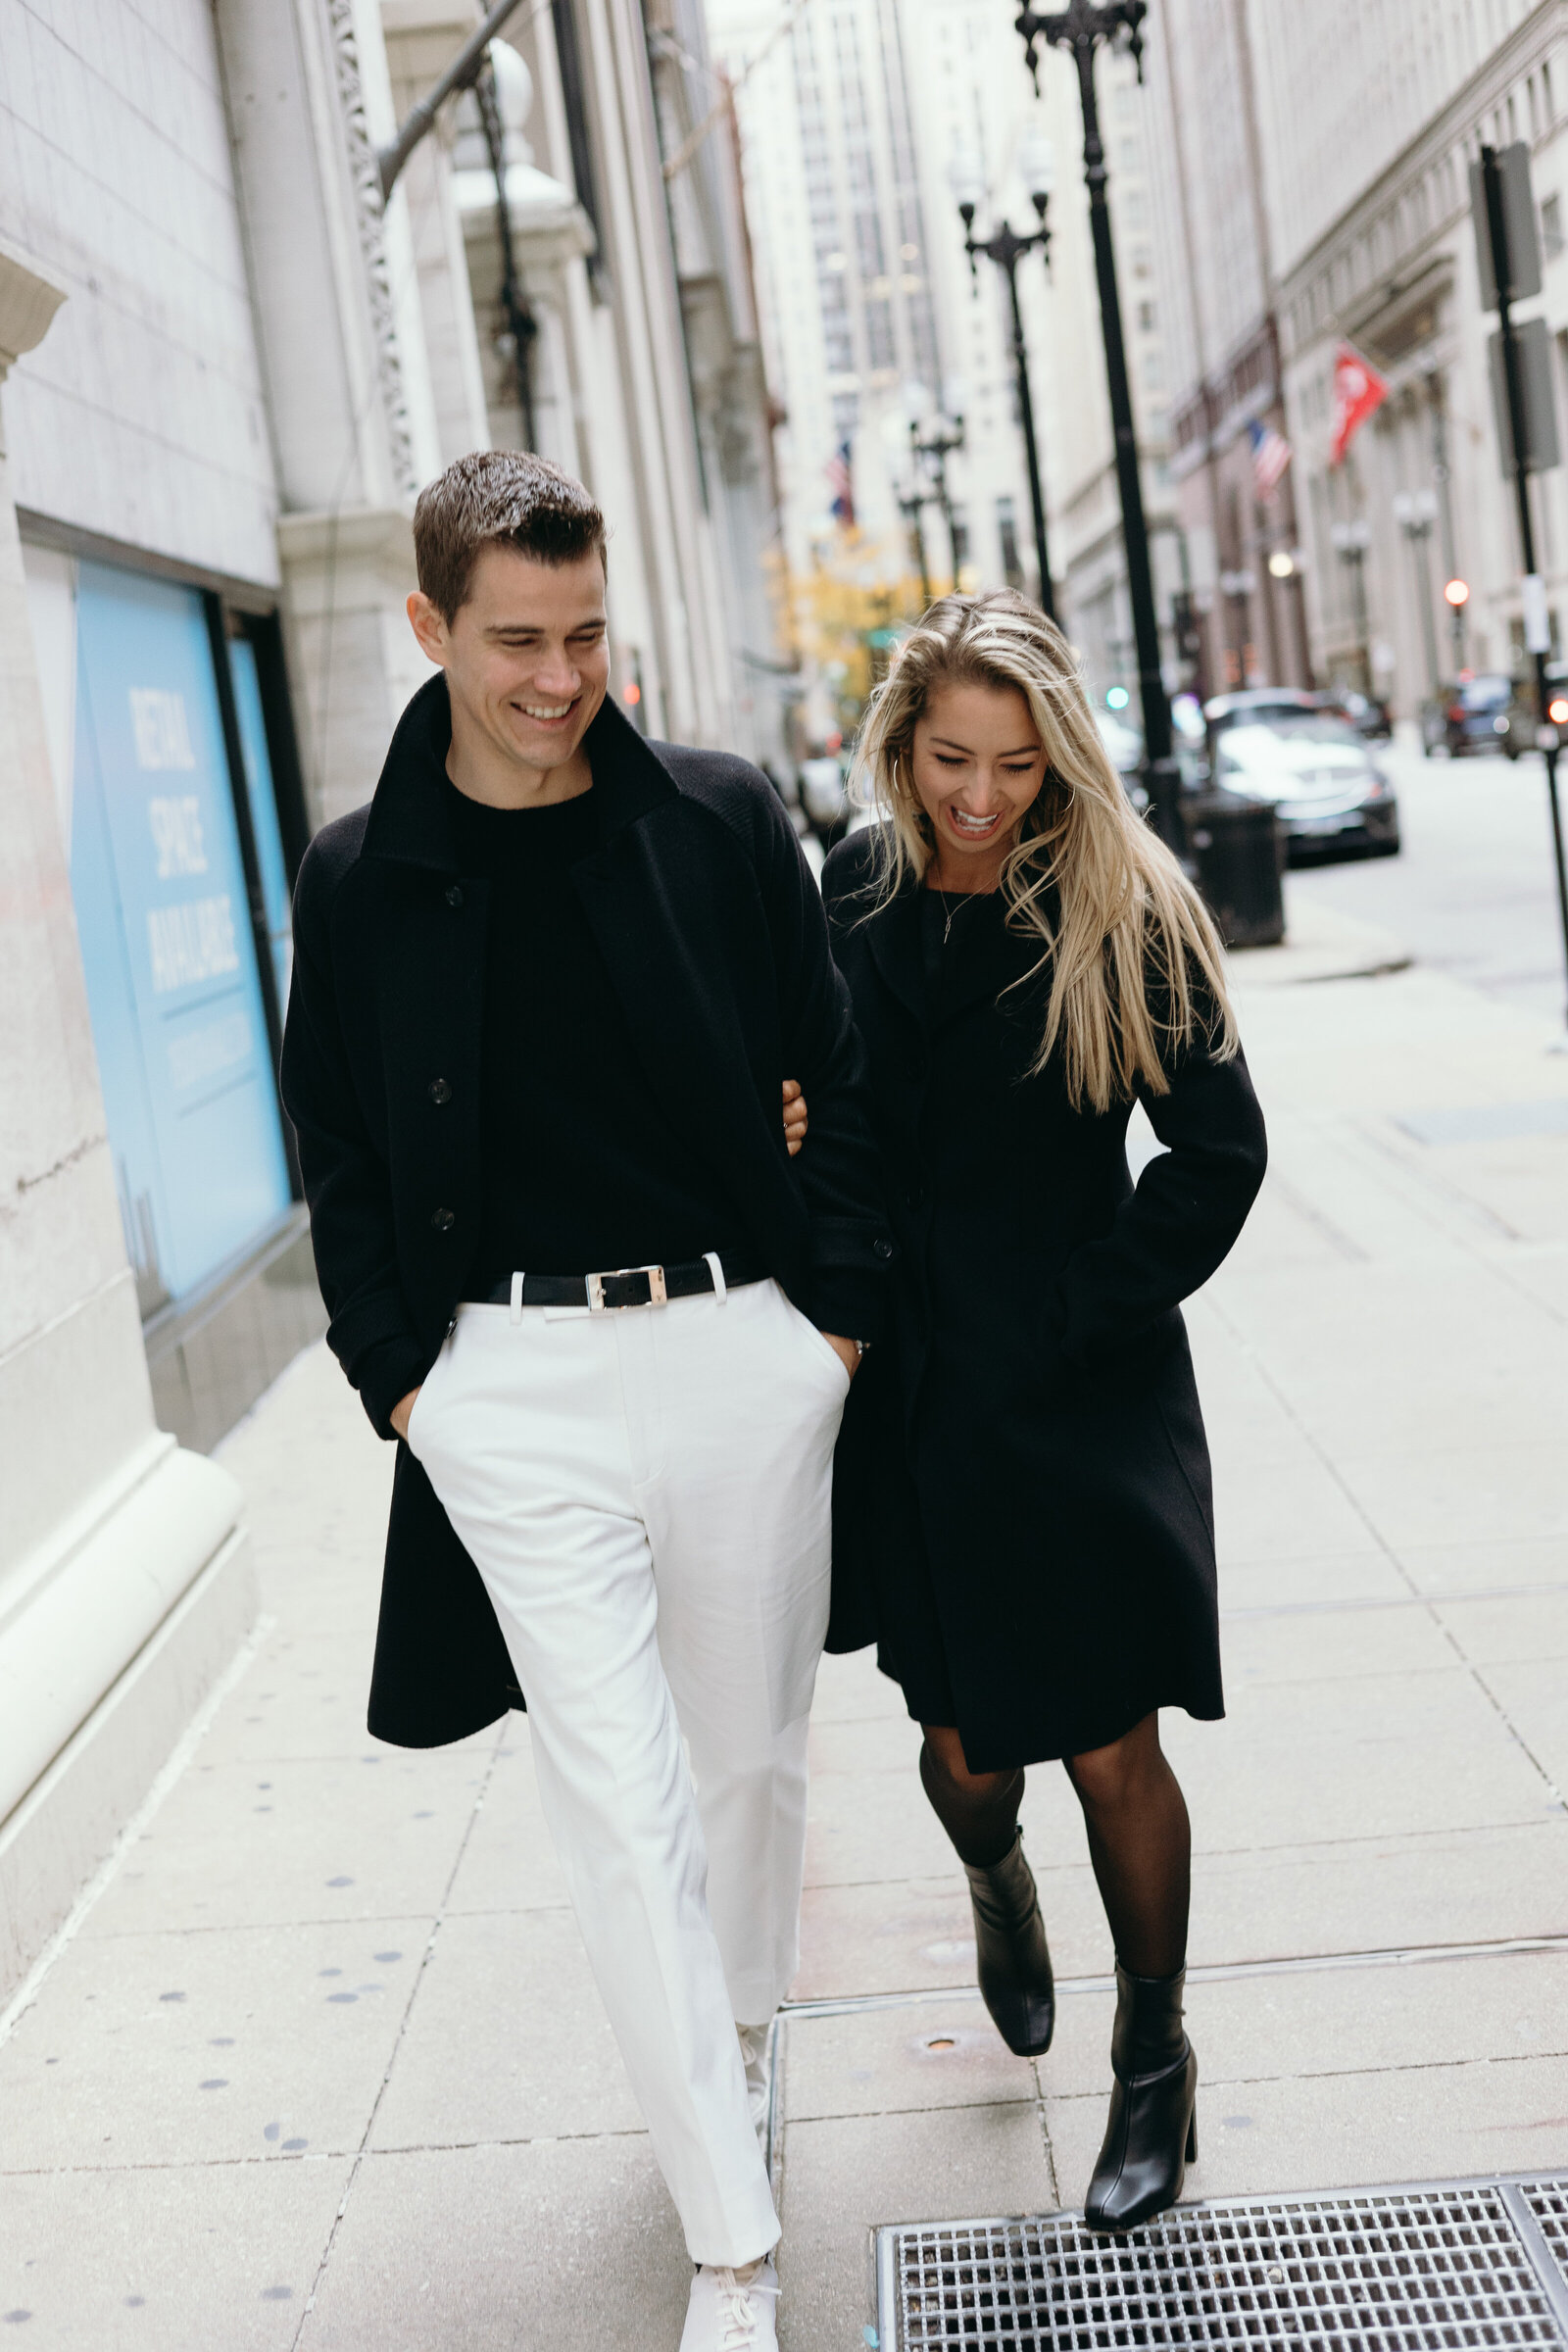 Z Photo and Film - Cody and Silvana's Chicago Engagement Shoot - Chicago, Illinois-80